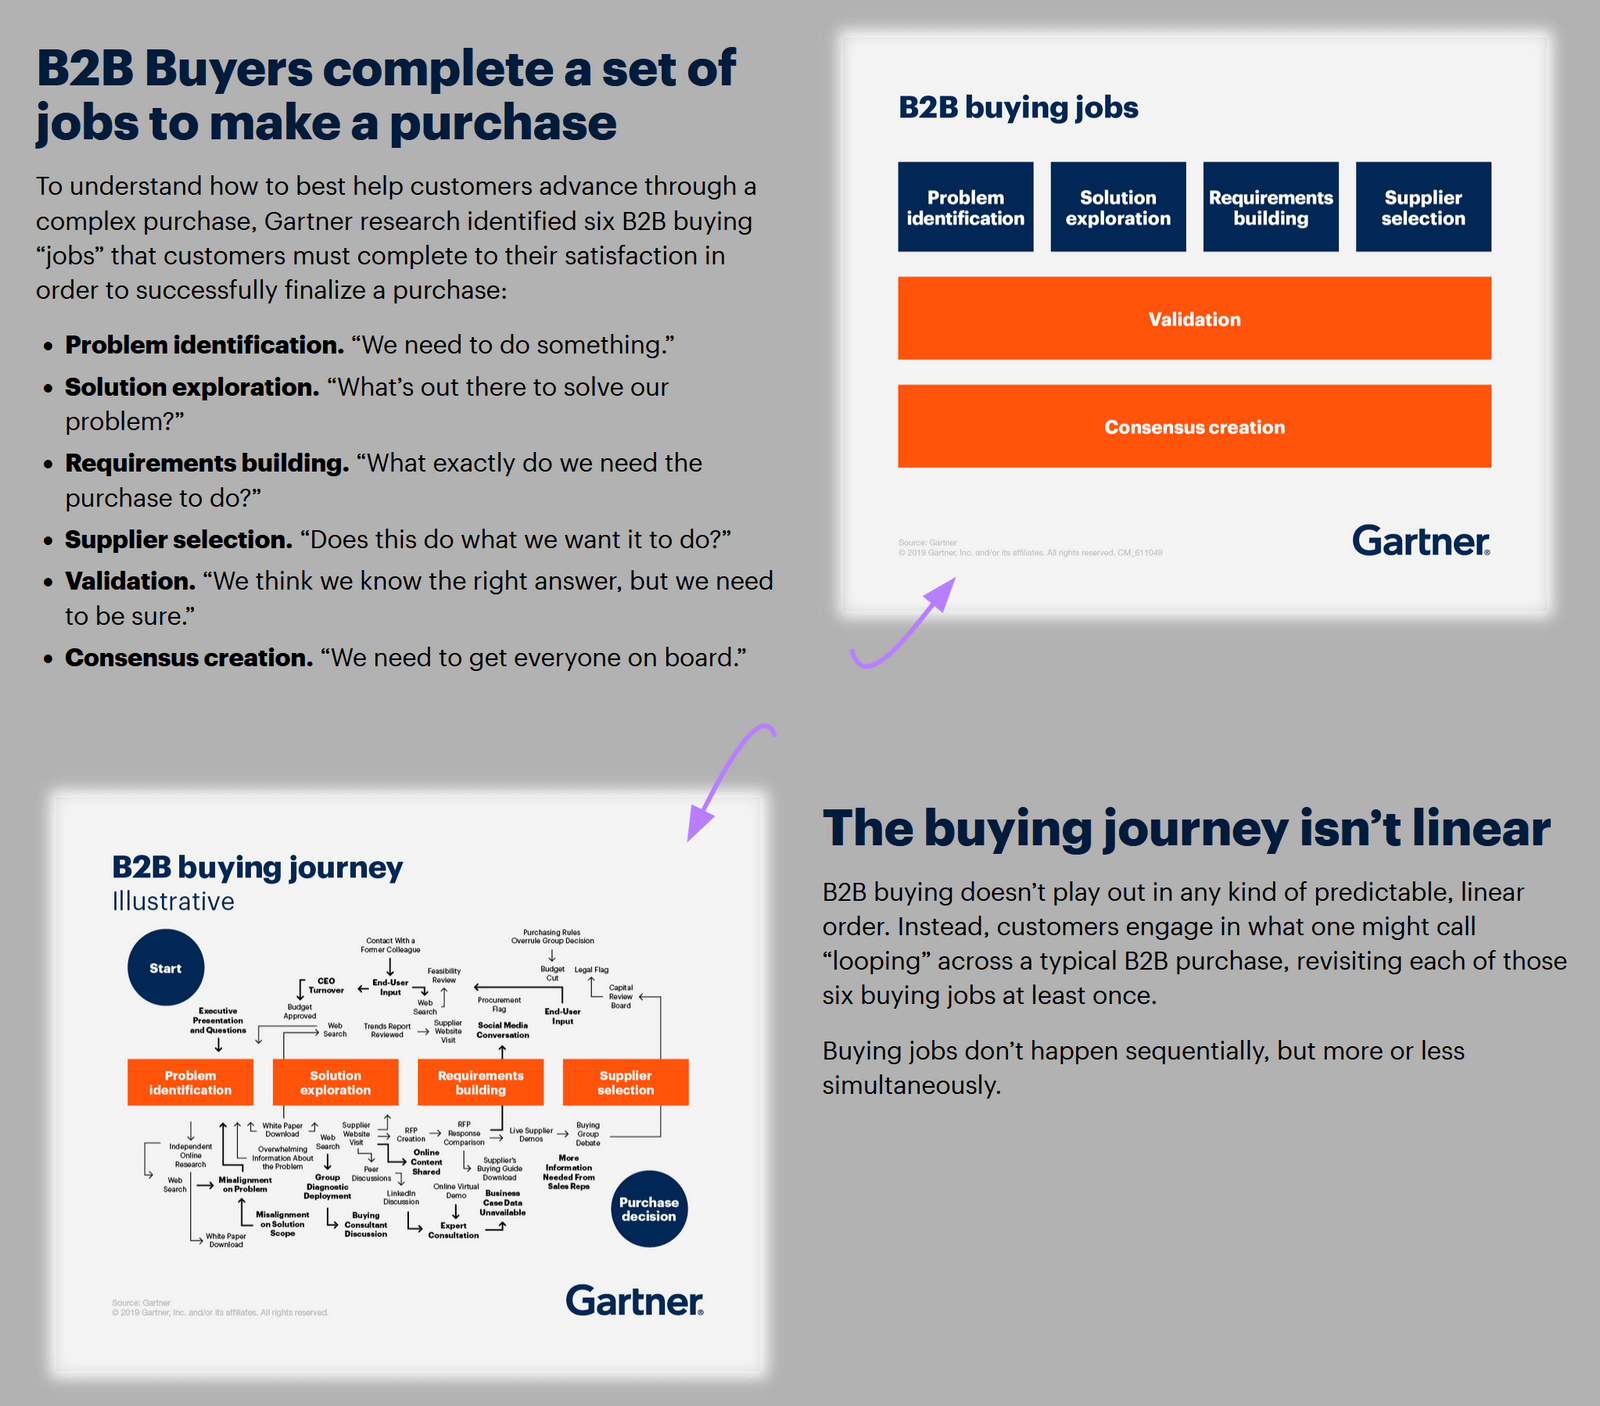 an example of Gartner illustrating the complex B2B buying journey